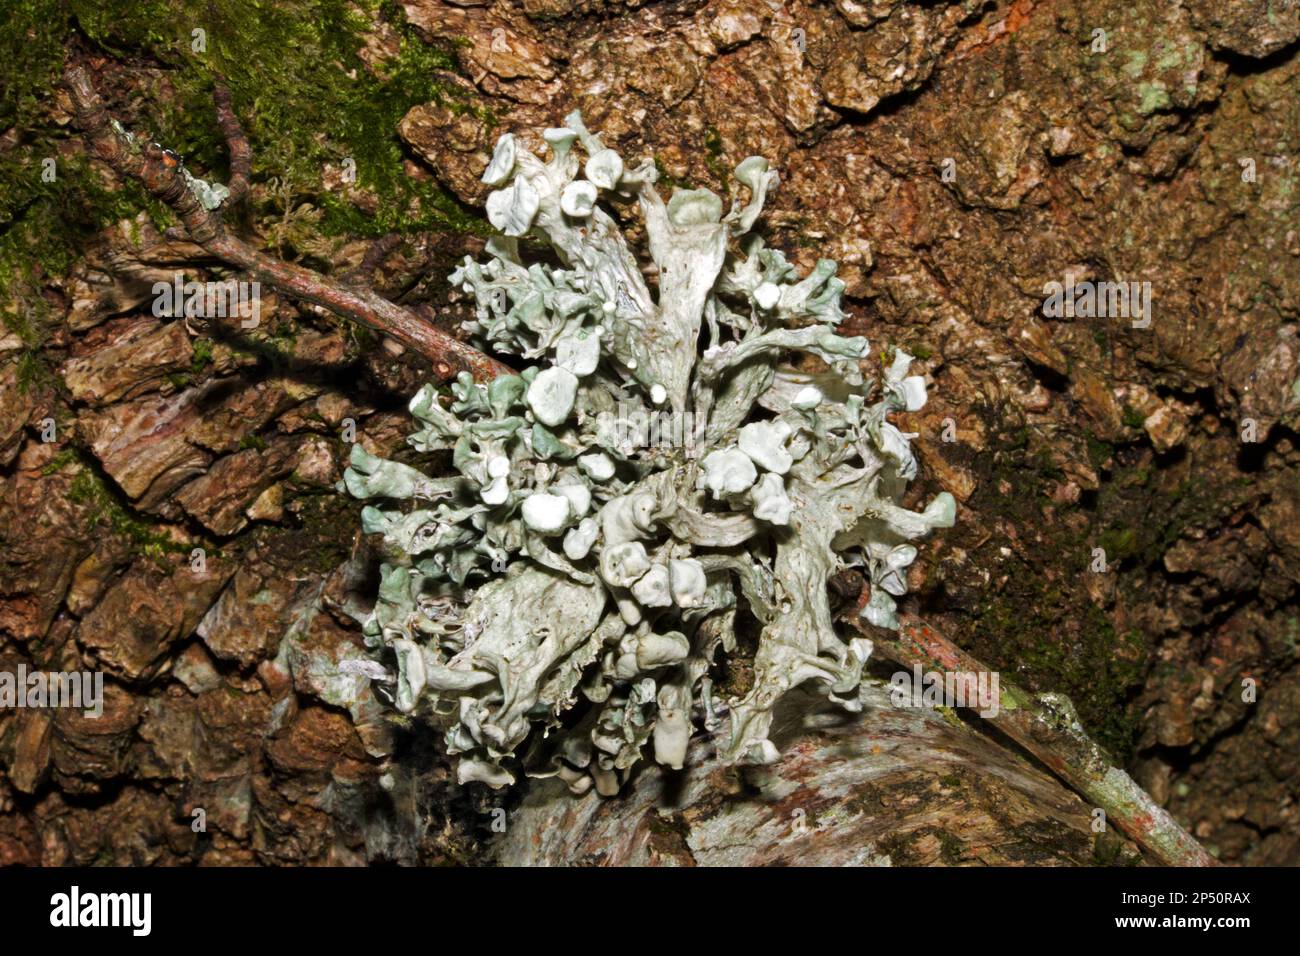 Ramalina fastigiata s a species of fruticose lichen found on trees. It is a common species occurring in Asia, Europe, and North America. Stock Photo